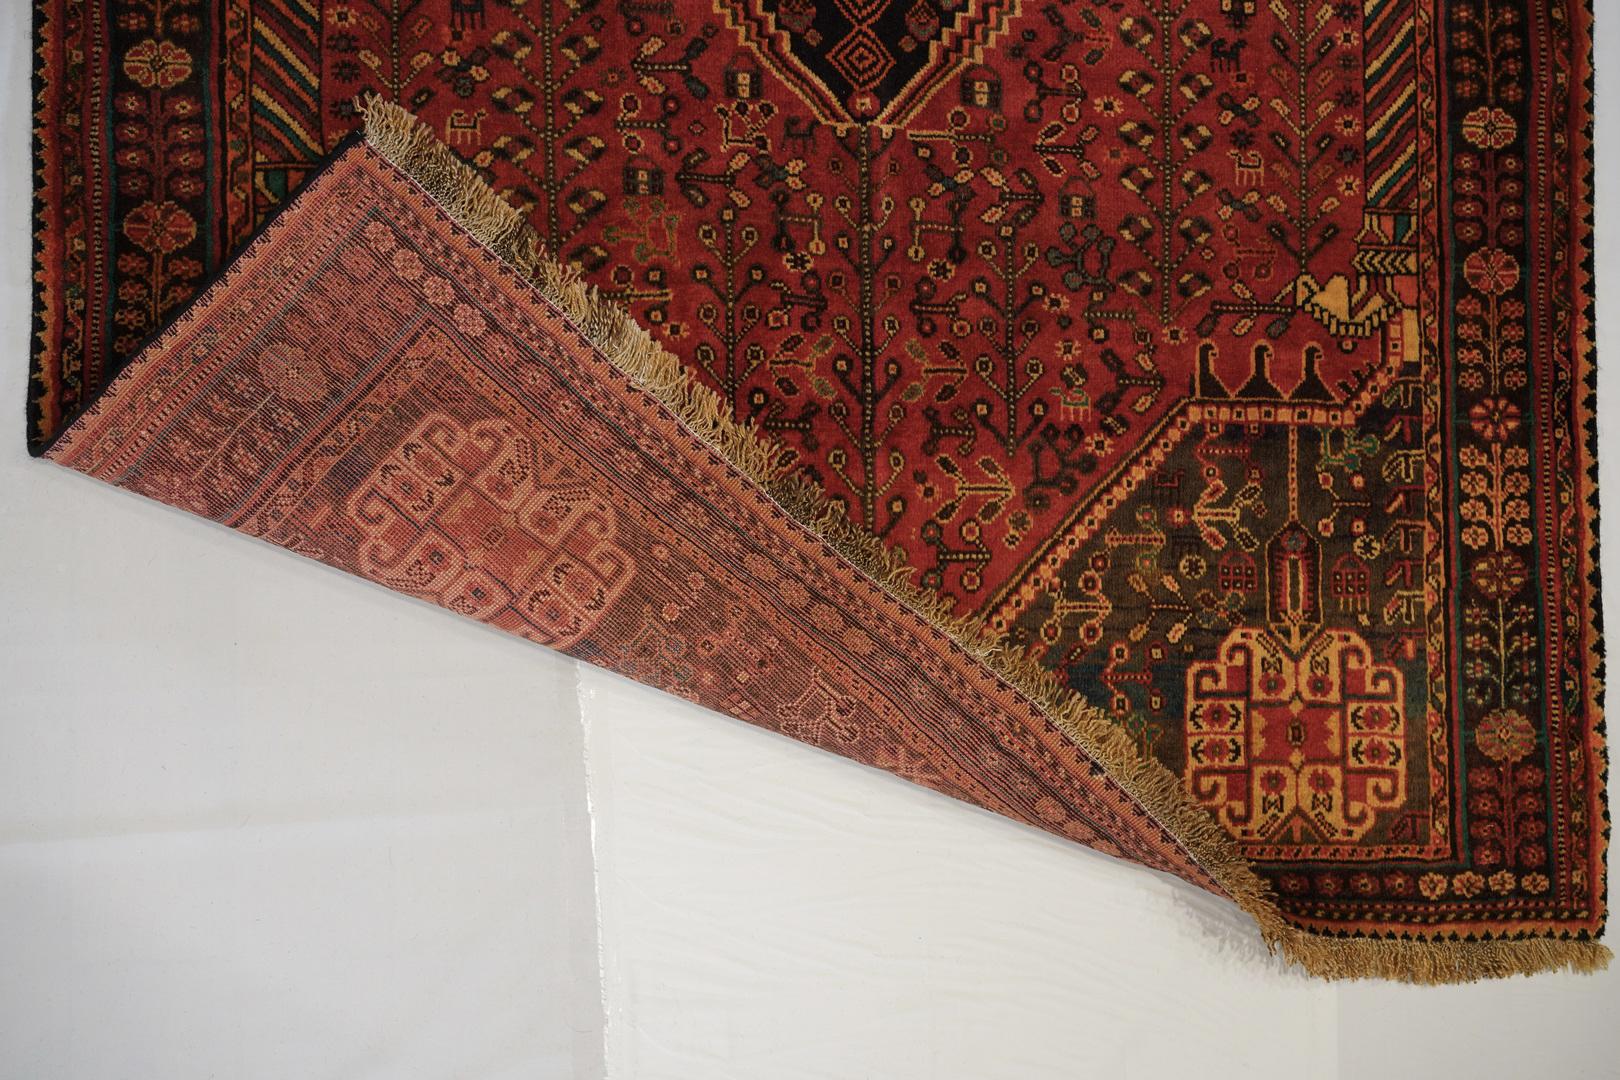 Another in our limited collection of superior woven and highly finished tribal pieces from the early 20th century . This example projects the authentic Qashgai symbols of tribal medallions, and flowers along with some artistic touches which belong